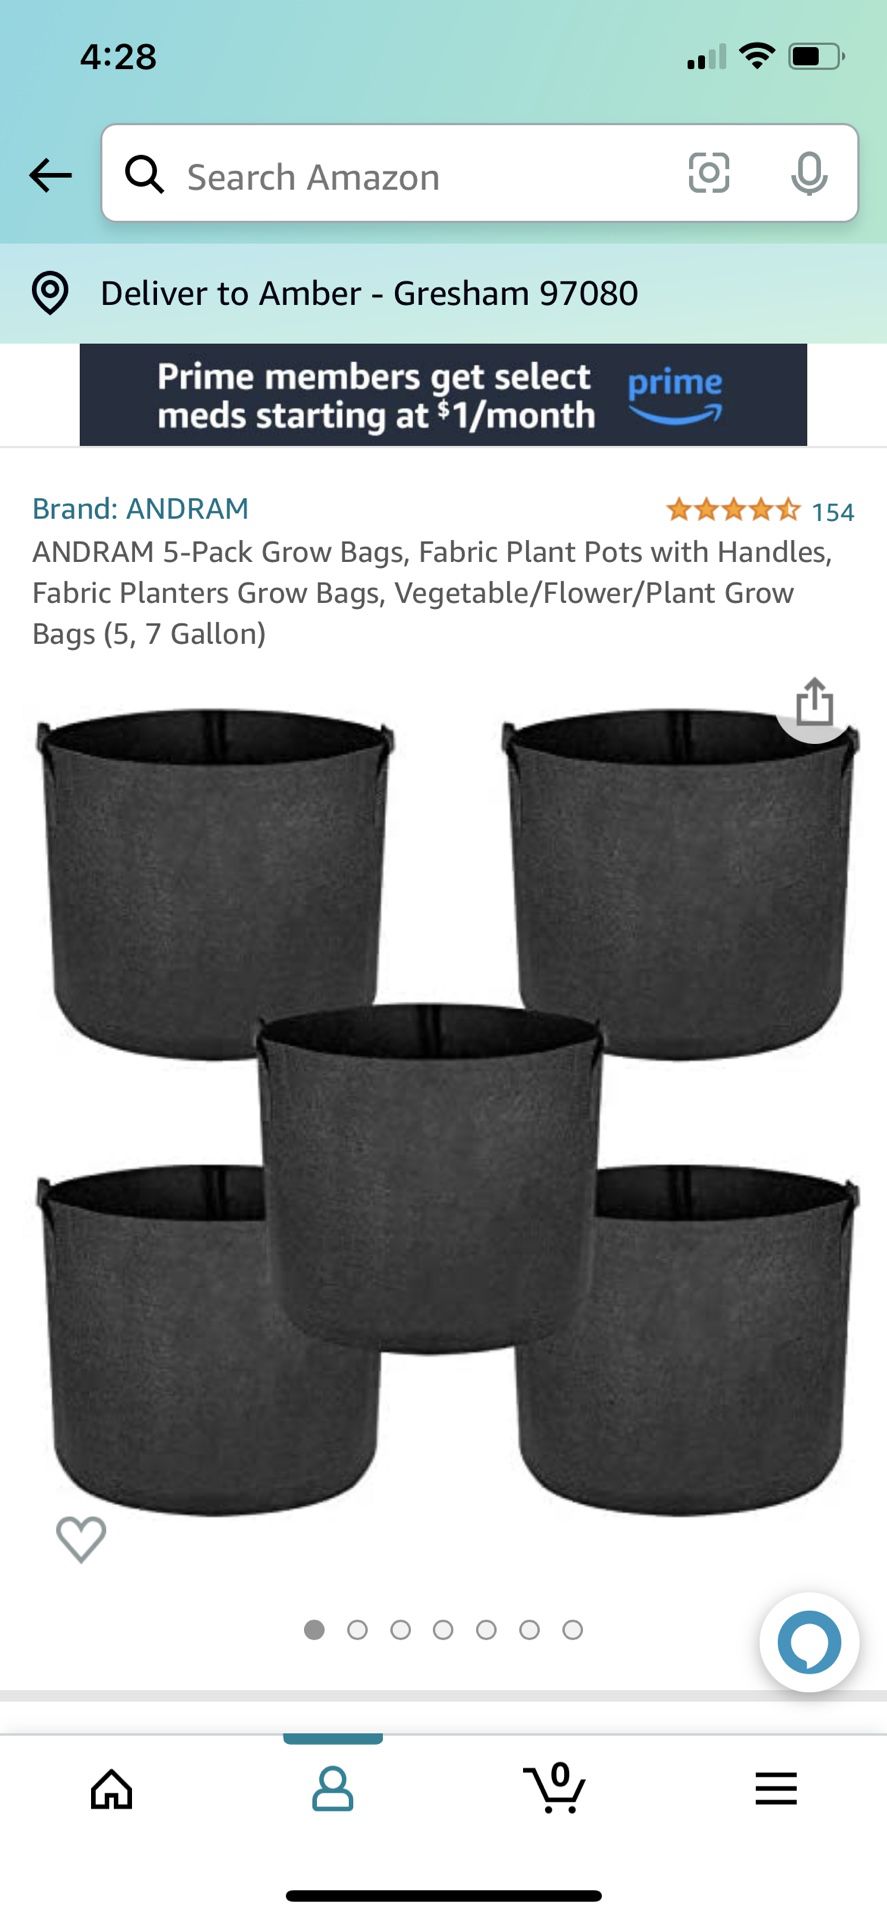 ANDRAM 5-Pack Grow Bags, Fabric Plant Pots with Handles, Fabric Planters Grow Bags, Vegetable/Flower/Plant Grow Bags 